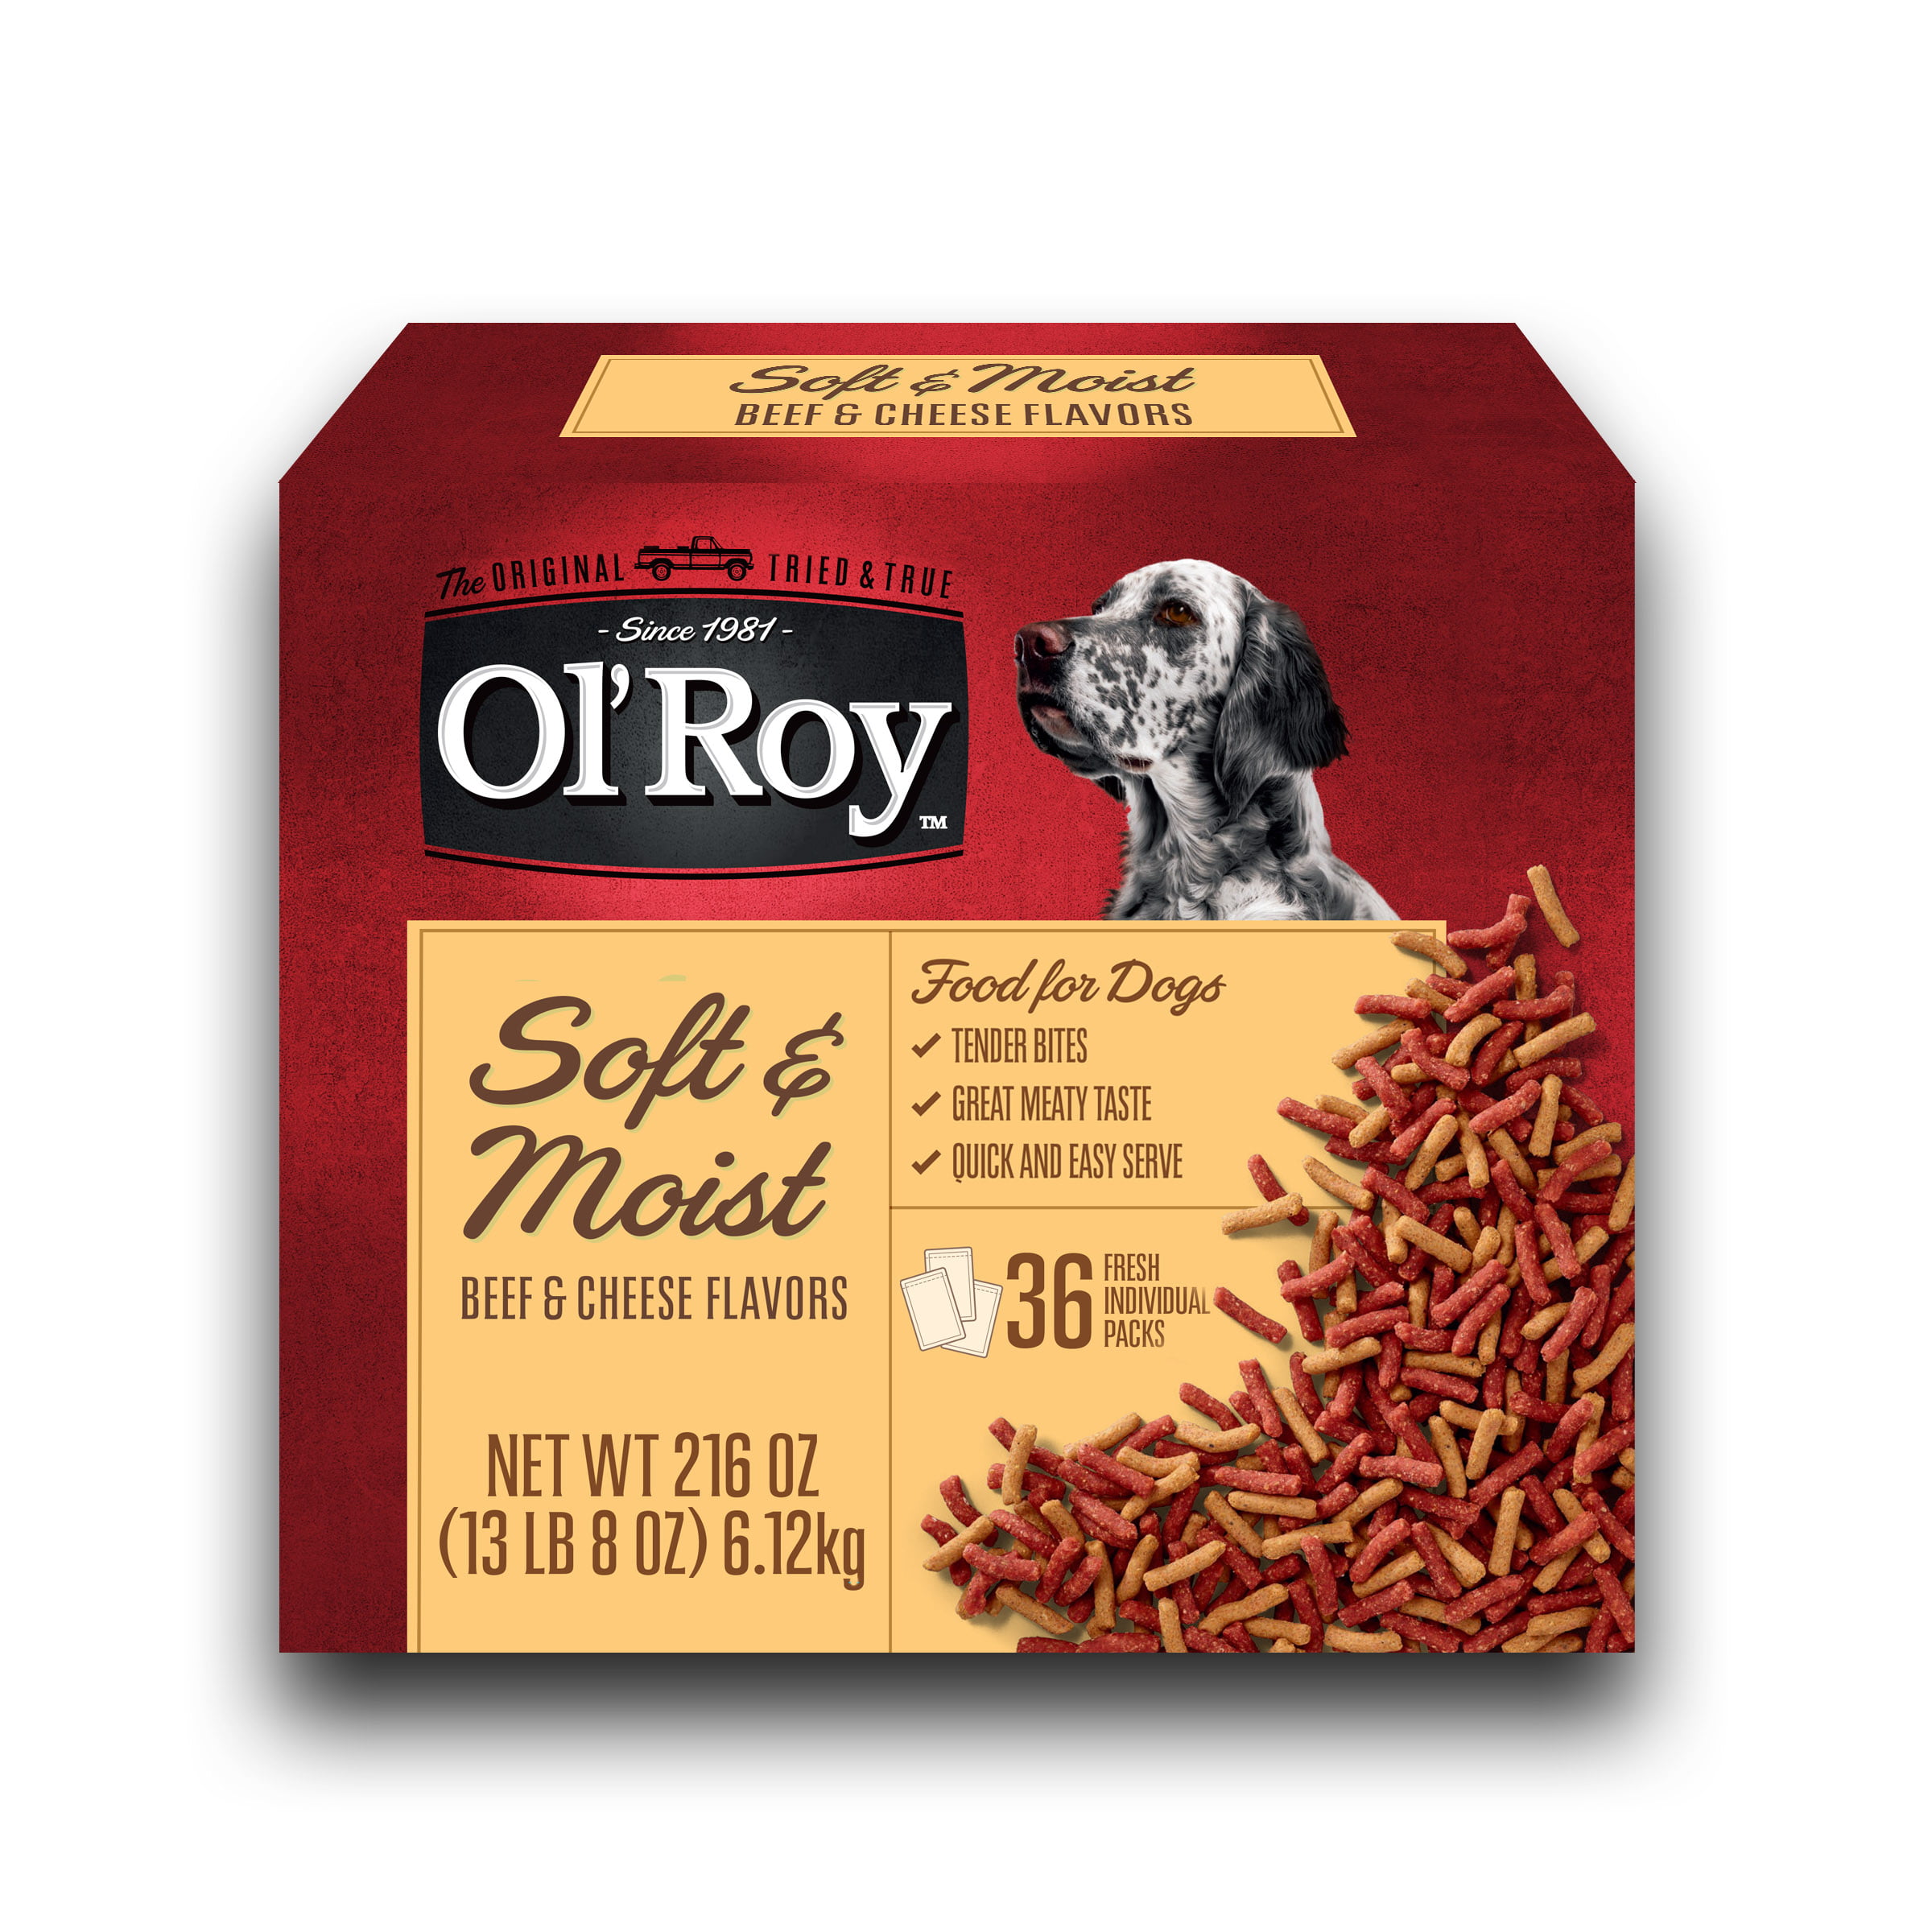 Ol' Roy Soft & Moist Beef & Cheese Flavor Dog Food, 216 oz, 36 Pouches